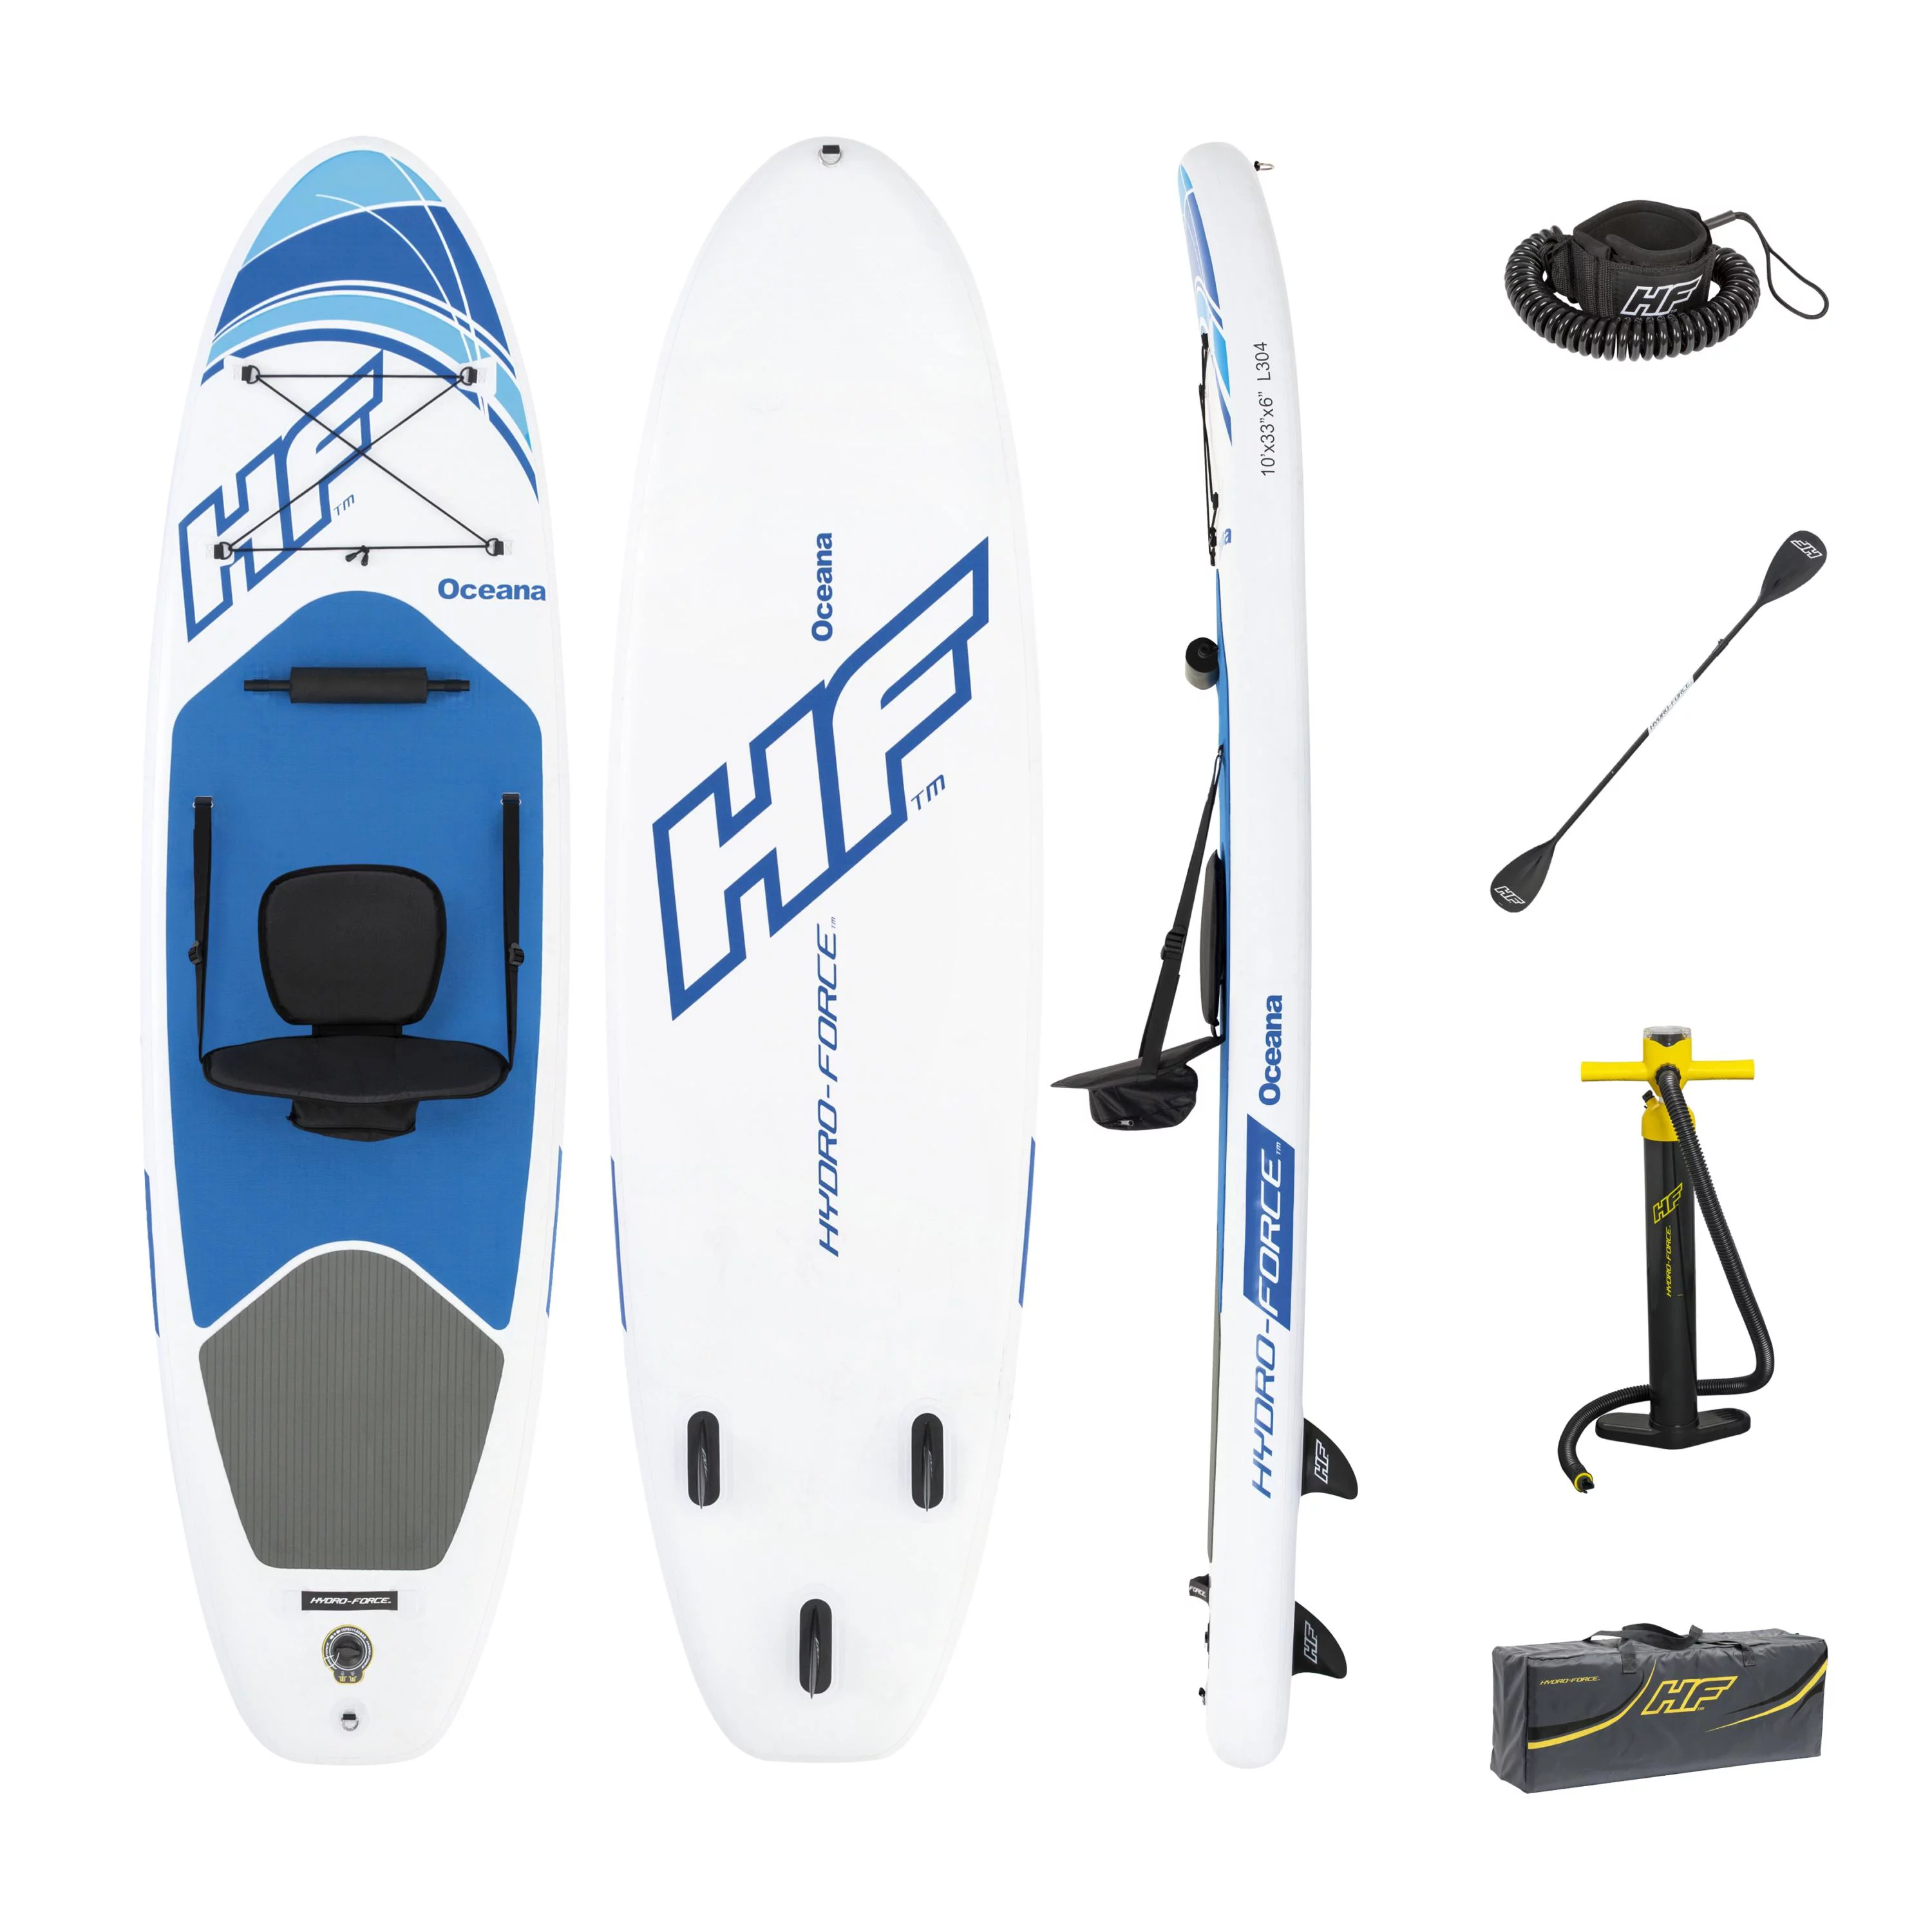 Hydro-Force Oceana 10ft 2-in-1 Inflatable Stand-Up Paddleboard/Kayak Set, Original